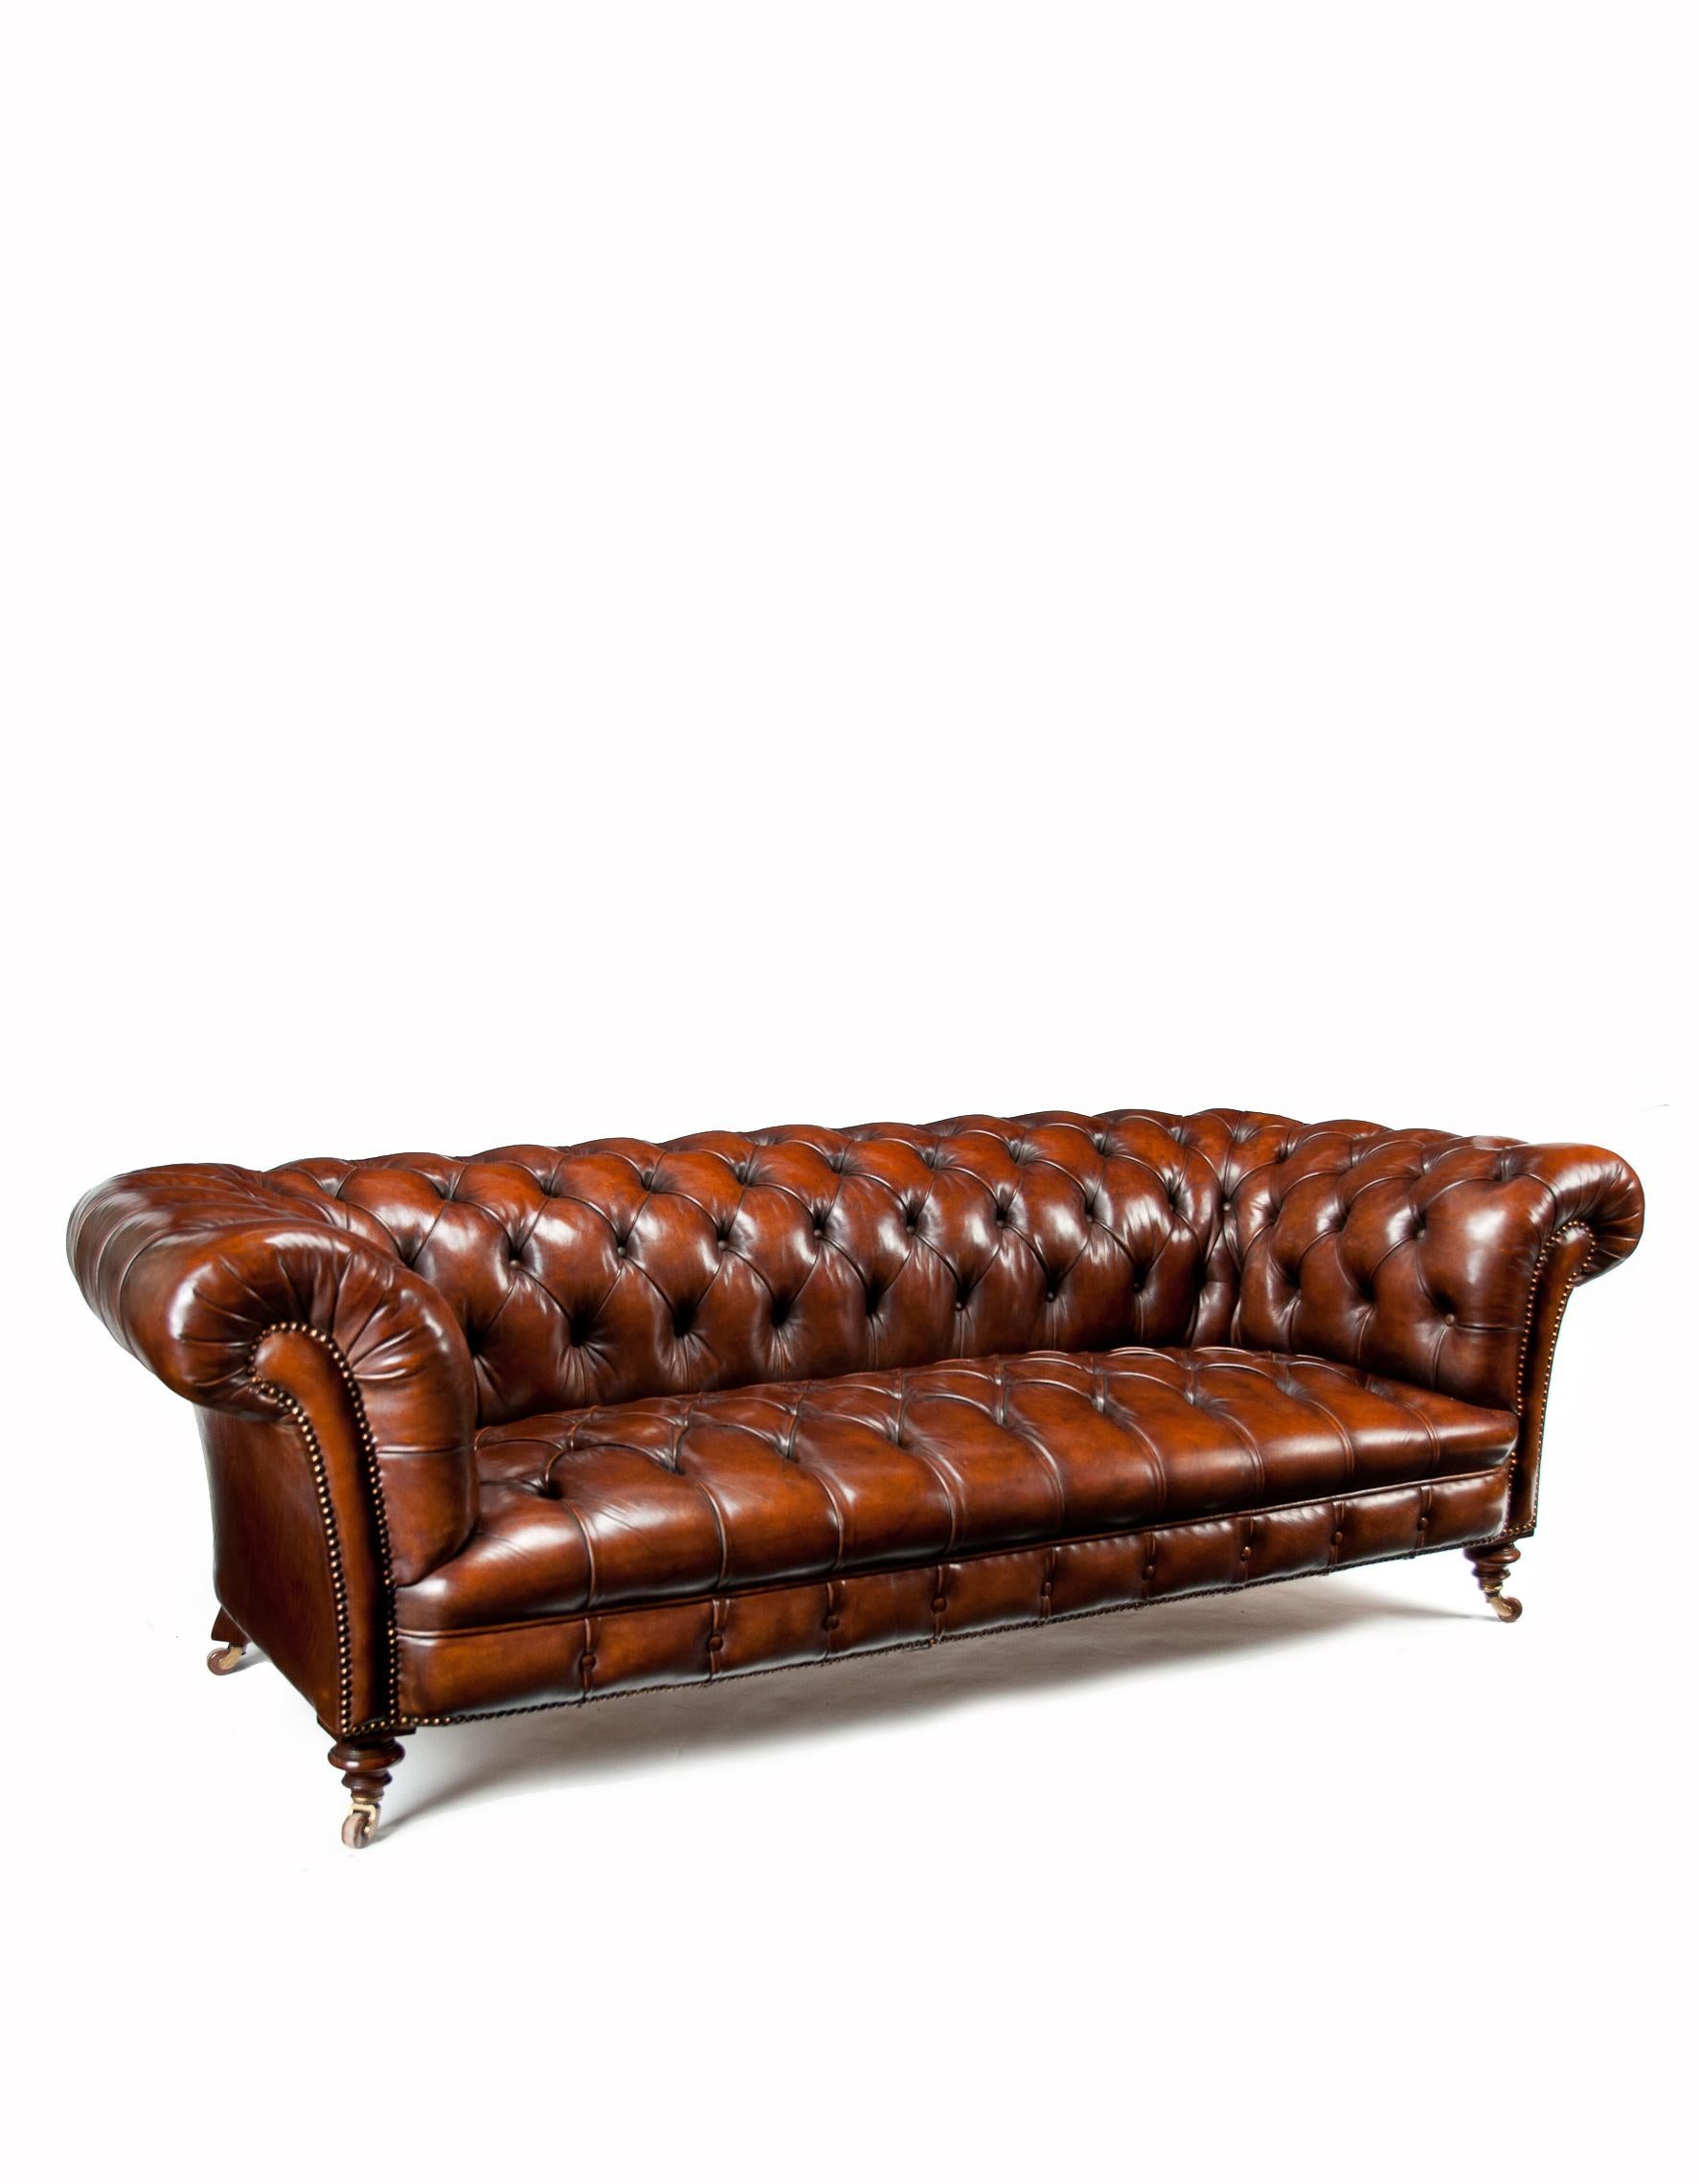 An extremely well-drawn 19th century Victorian walnut deep buttoned leather upholstered Chesterfield stamped by the famous makers James Jas Shoolbred & Co. London.
Along with Howard and Sons Jas Shoolbred are two of the most sought-after names in